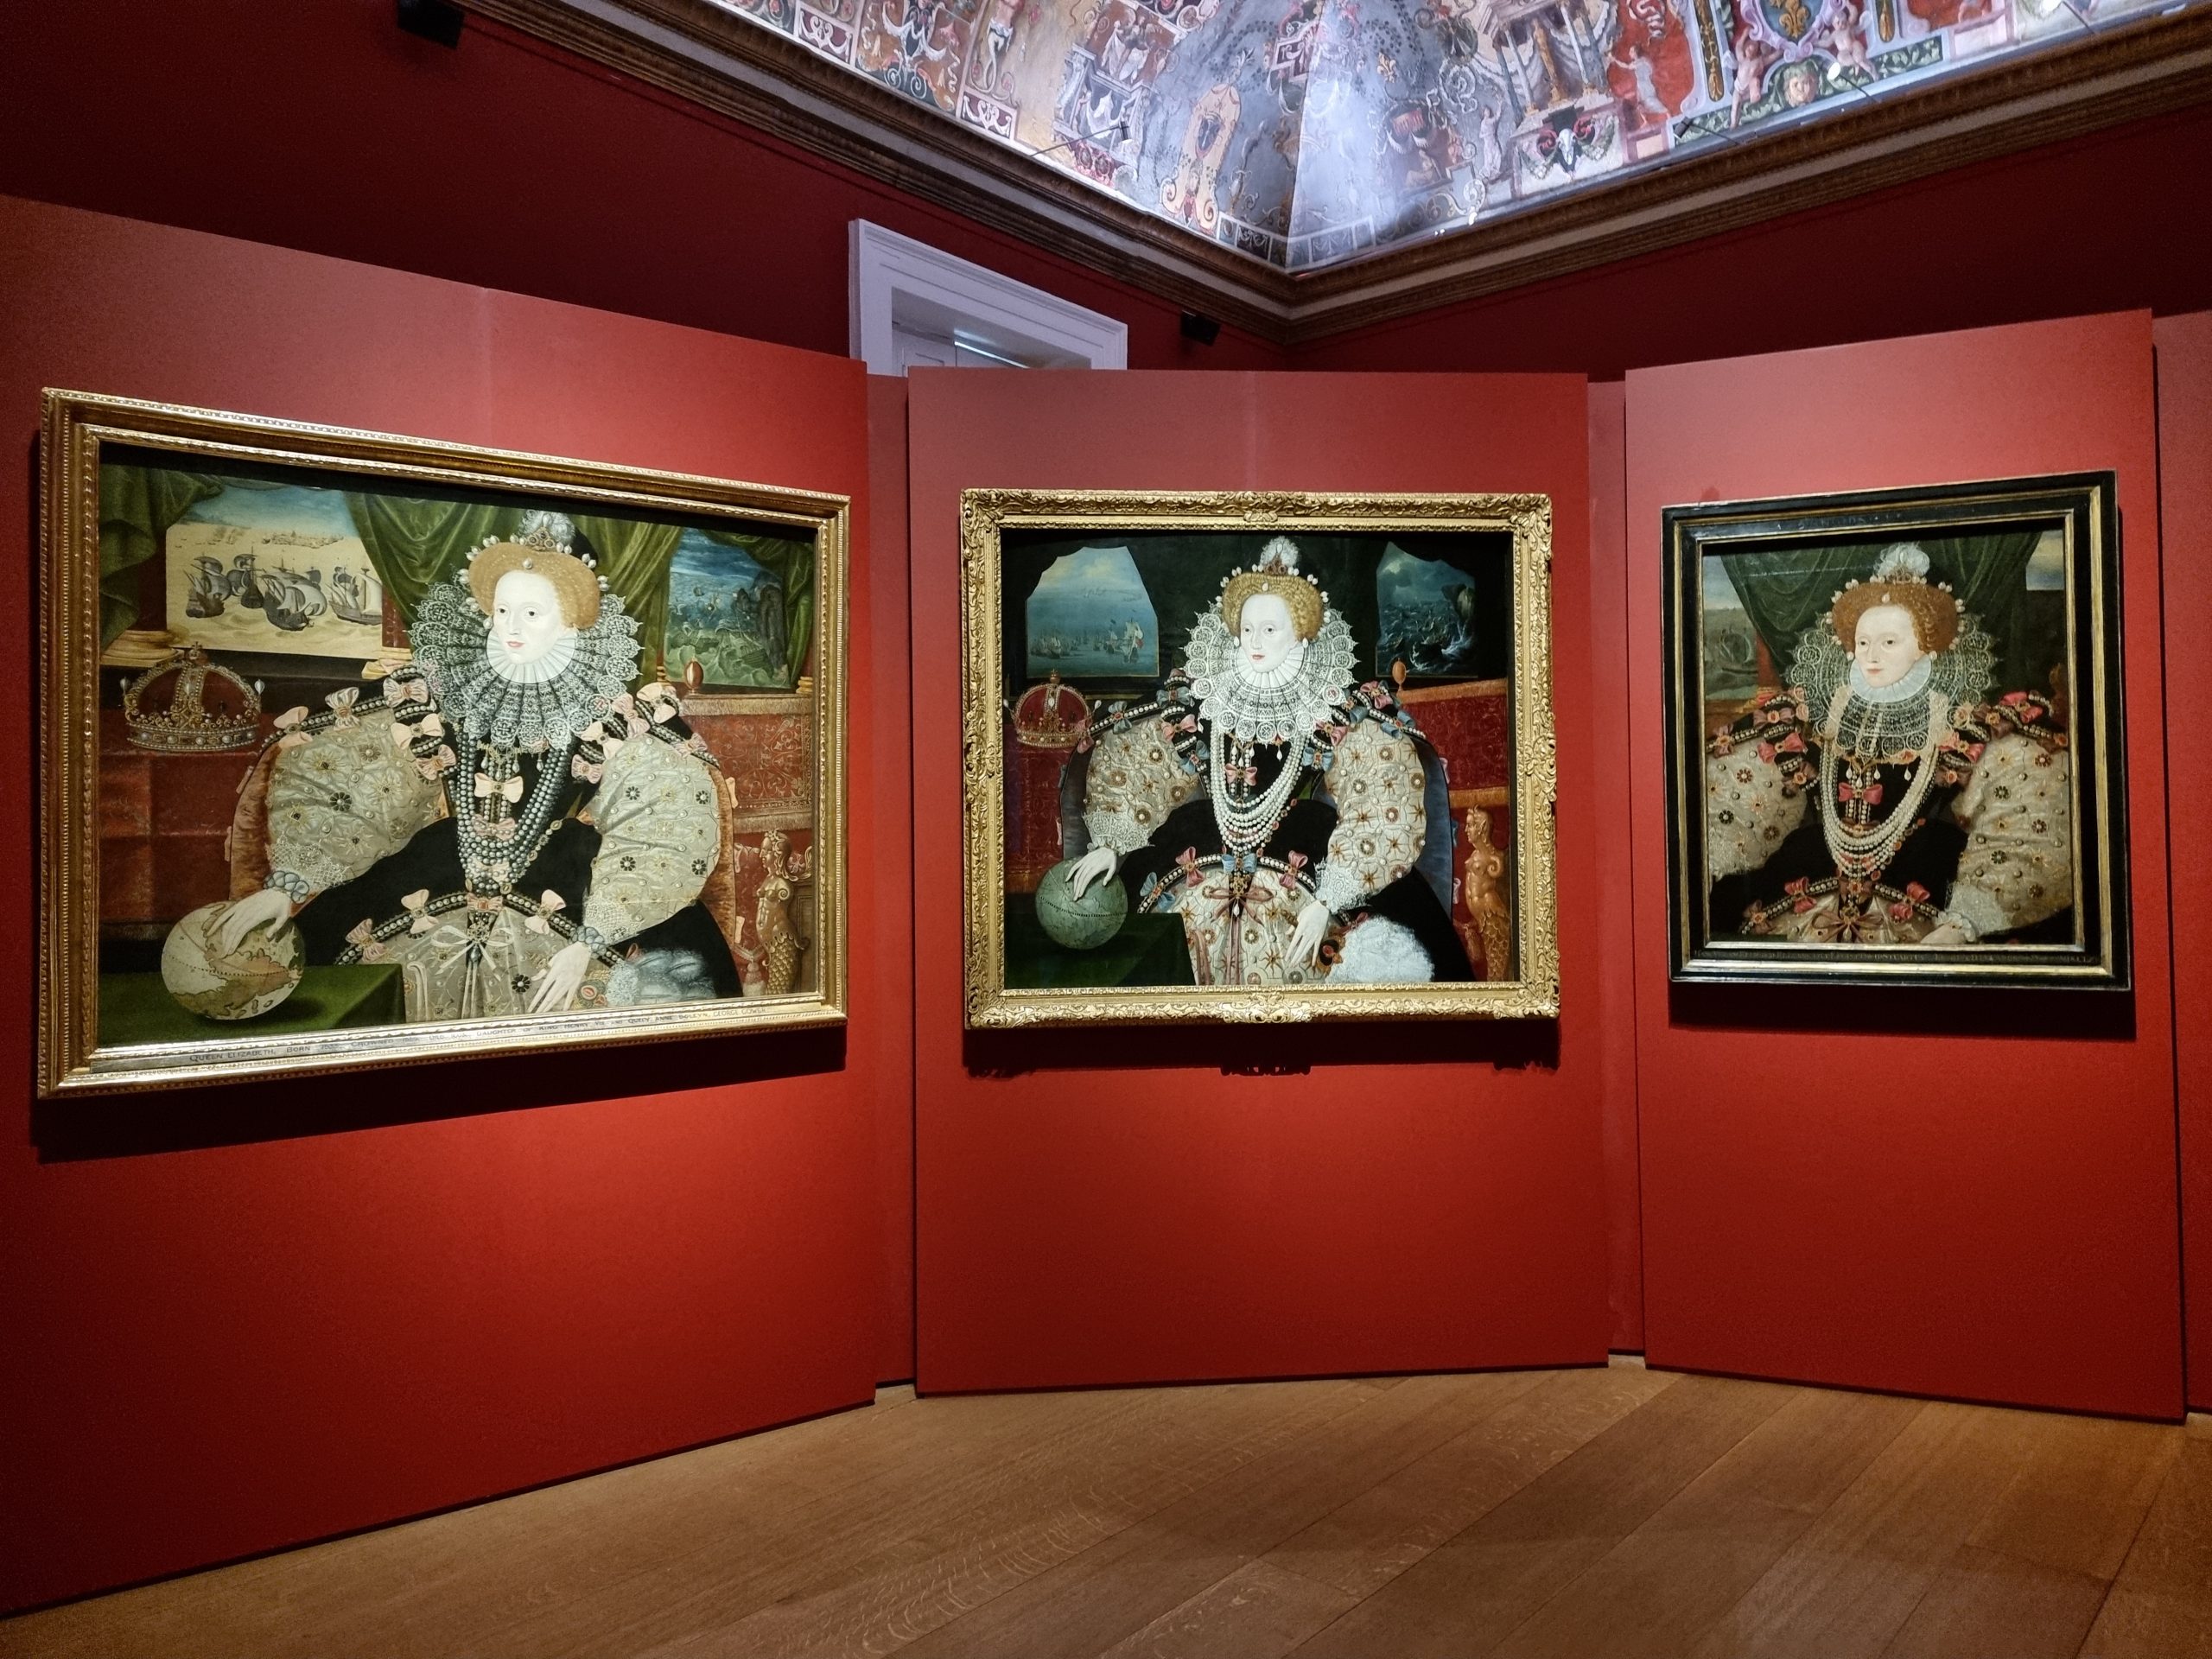 three portraits of Elizabeth I hung on red background. Elizabeth wears a lace ruff, and lots of pearsl, while her dress features bows. Her hand rests on a globe, with a crown next to her, and the Armada battle goes on in the background, seen through the windows